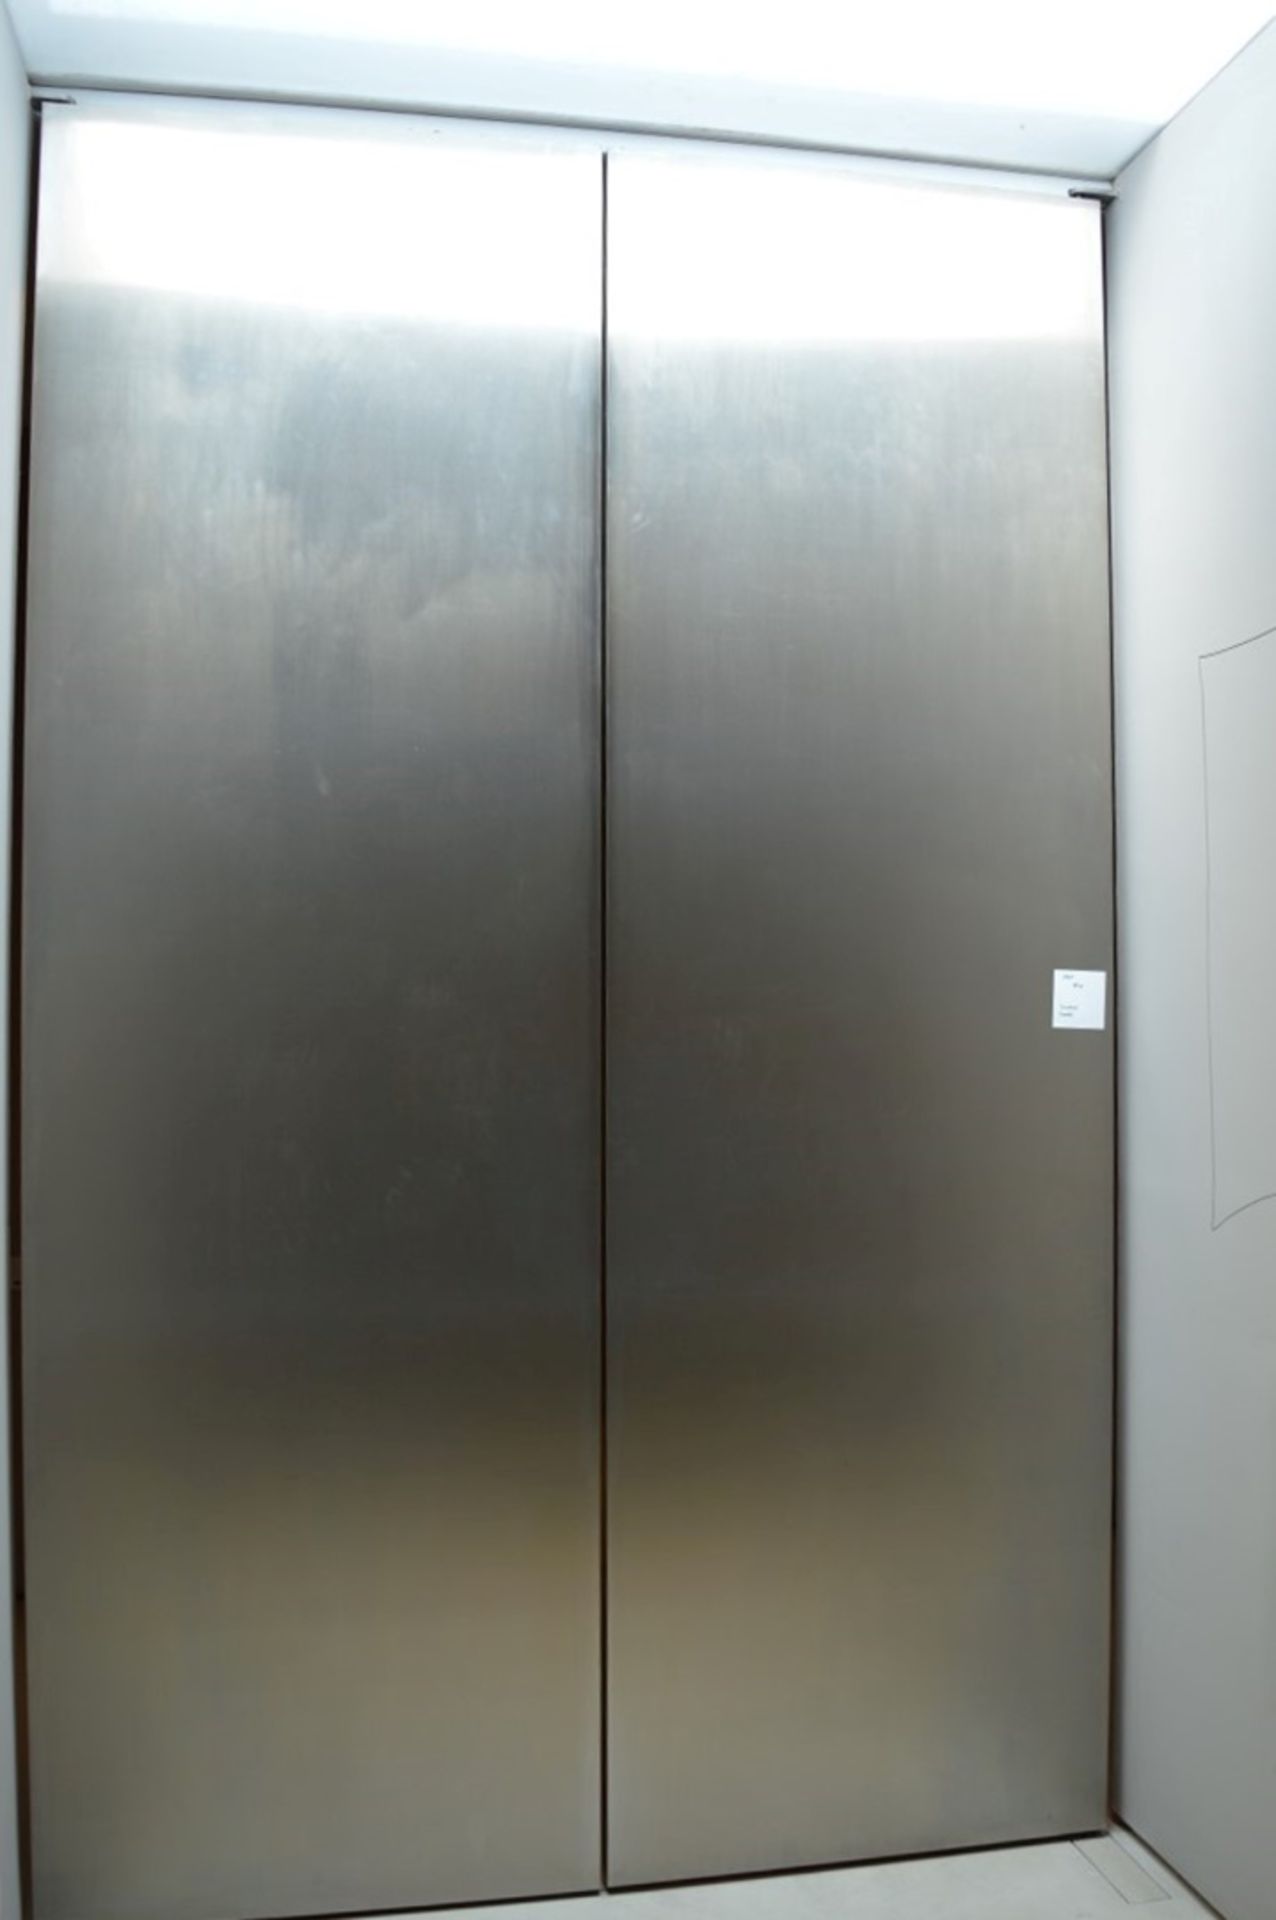 2 x Bespoke Internal Doors With Stainless Steel Finish - Pair of - Large Size - Ideal For Interior - Image 3 of 10